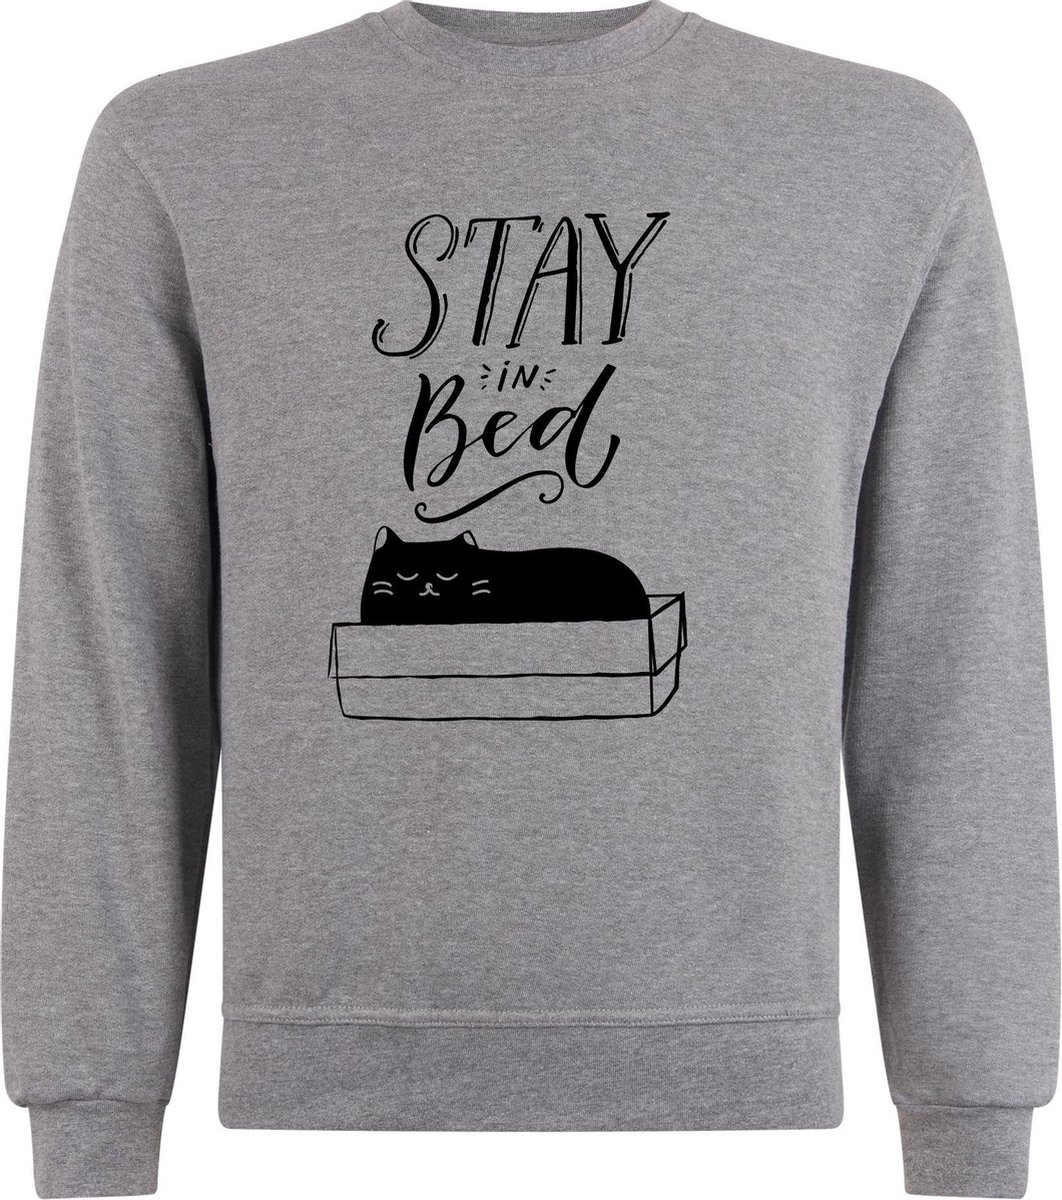 Sweater zonder capuchon - Jumper - Trui - Vest - Lifestyle sweater - Chill Sweater - Kat - Cat - Stay In Bed - S.Grey - S